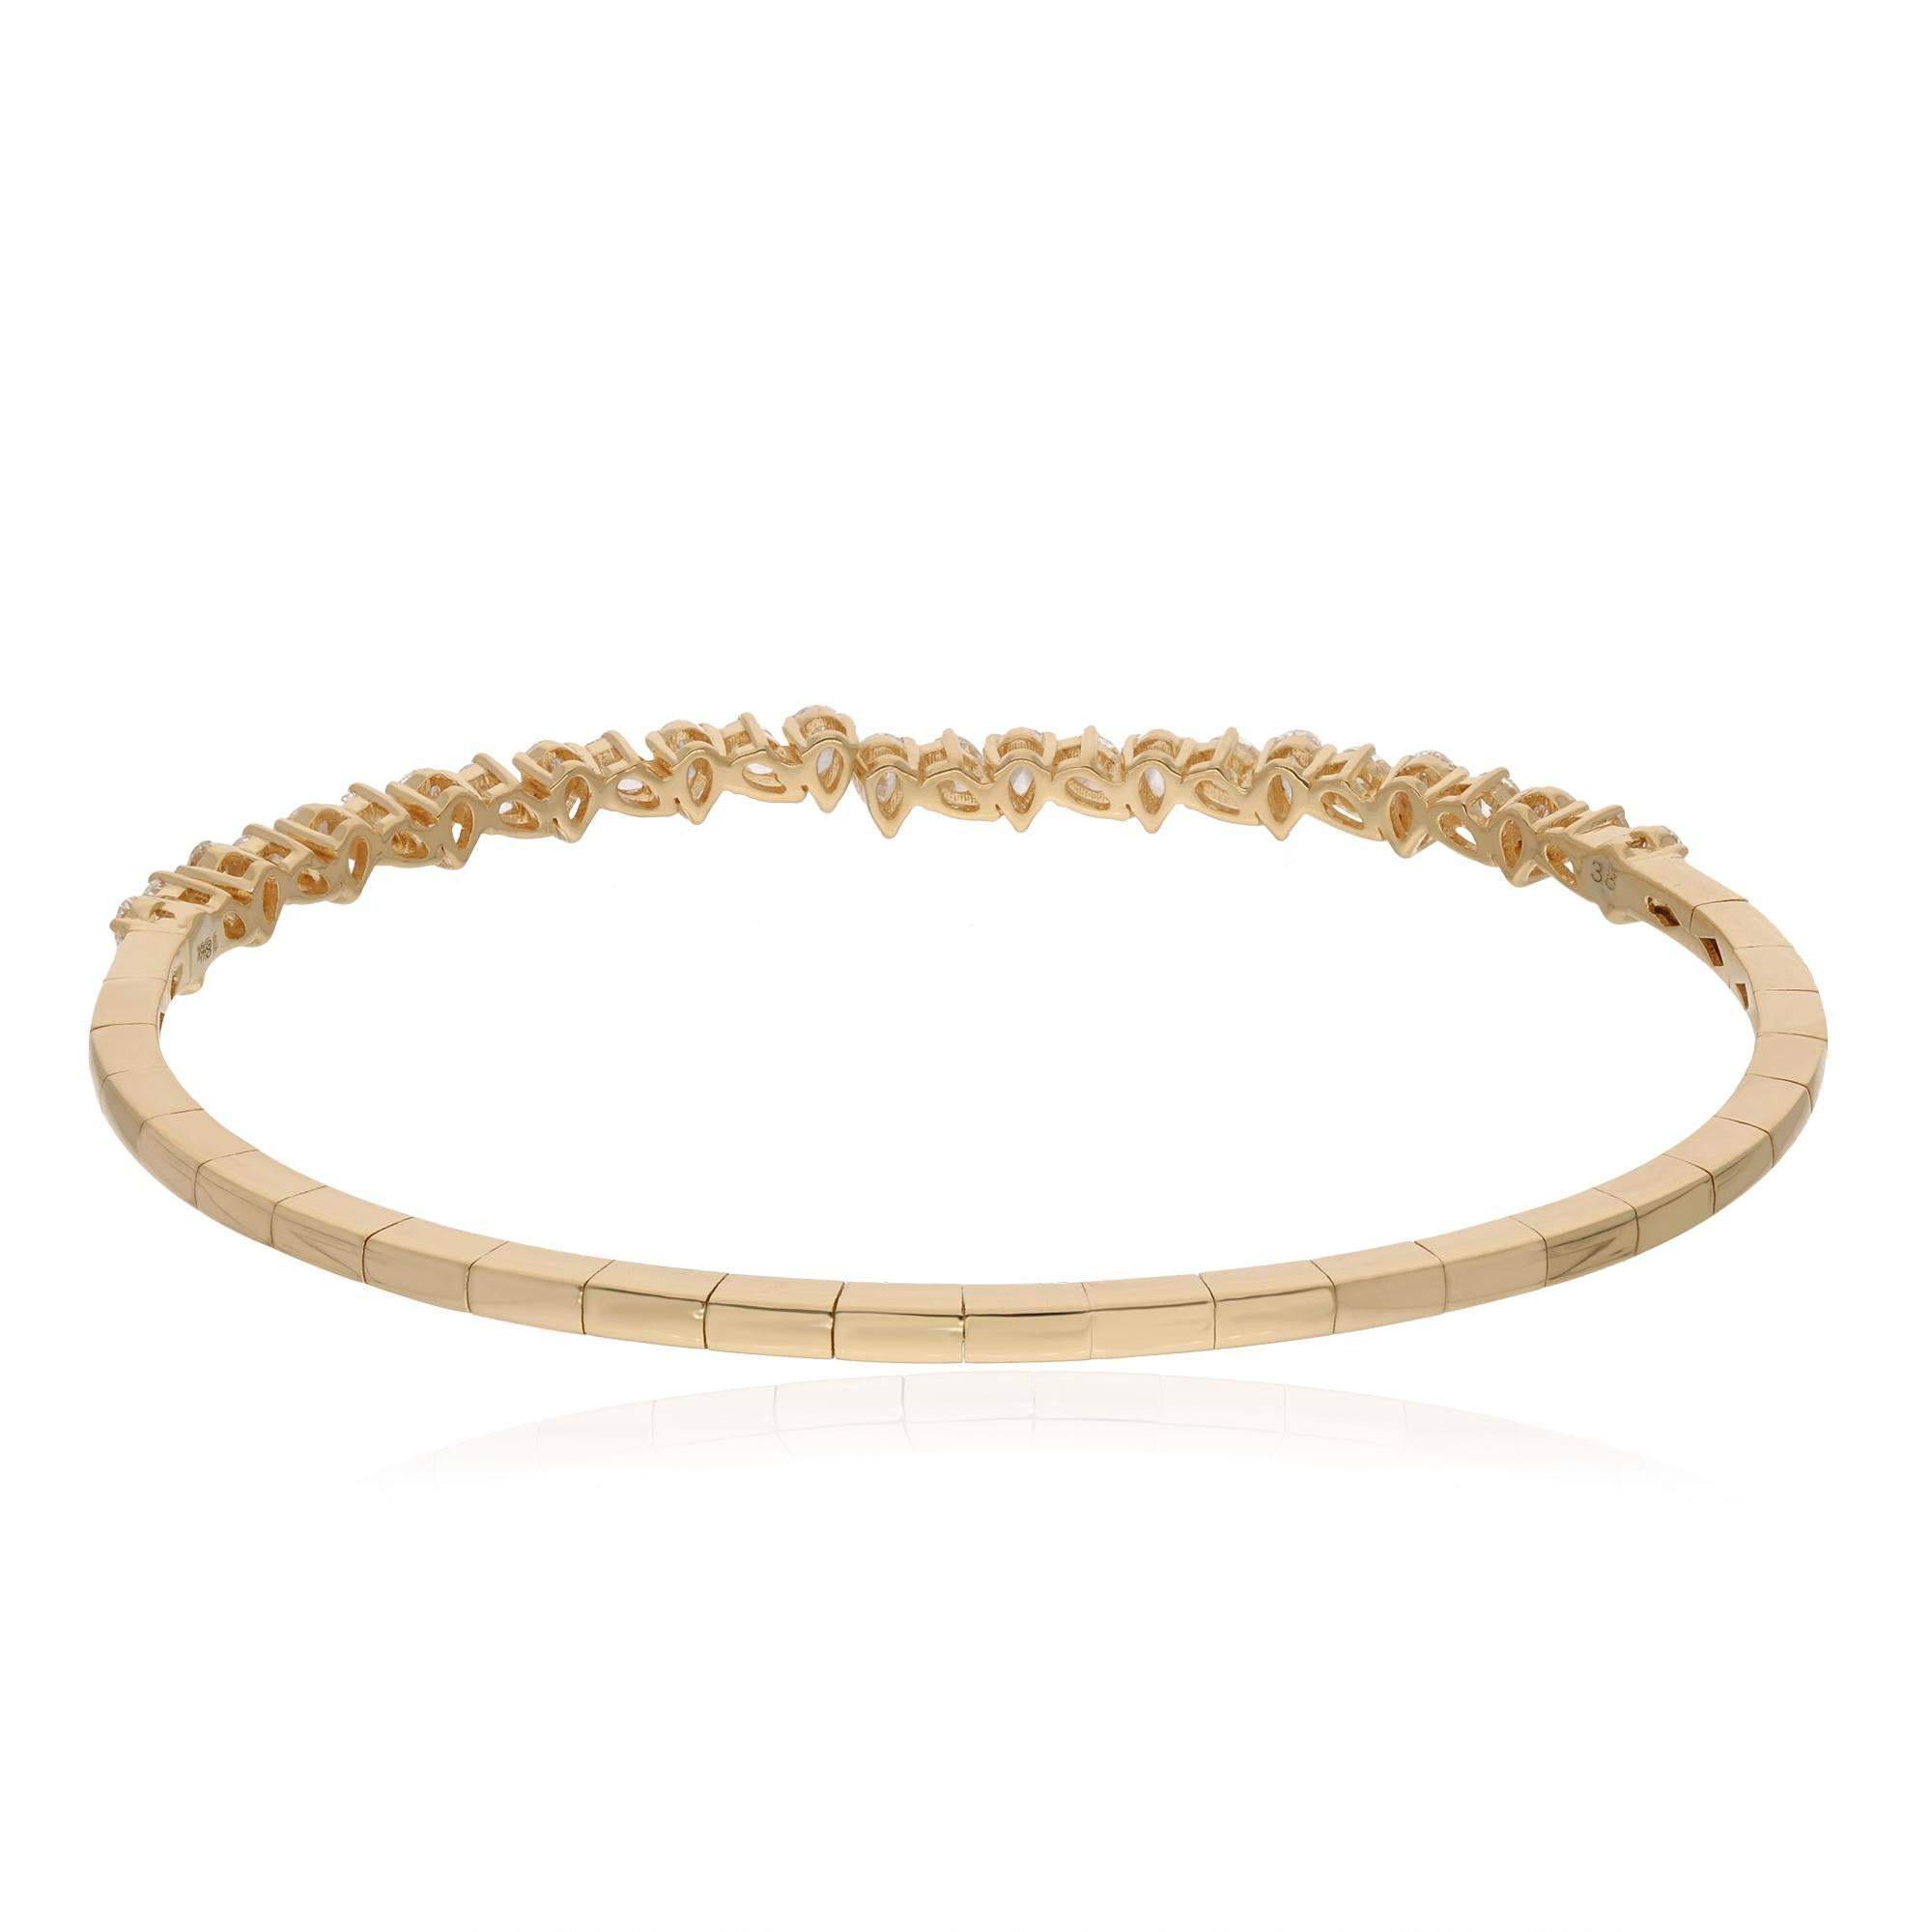 Made from solid 18k gold, this Bangle Bracelet features a stunning array of pear-shaped diamonds that catch the light beautifully and sparkle with every movement. The bangle is available in 10k/14k/18k, Rose Gold/Yellow Gold/White Gold.

This is a